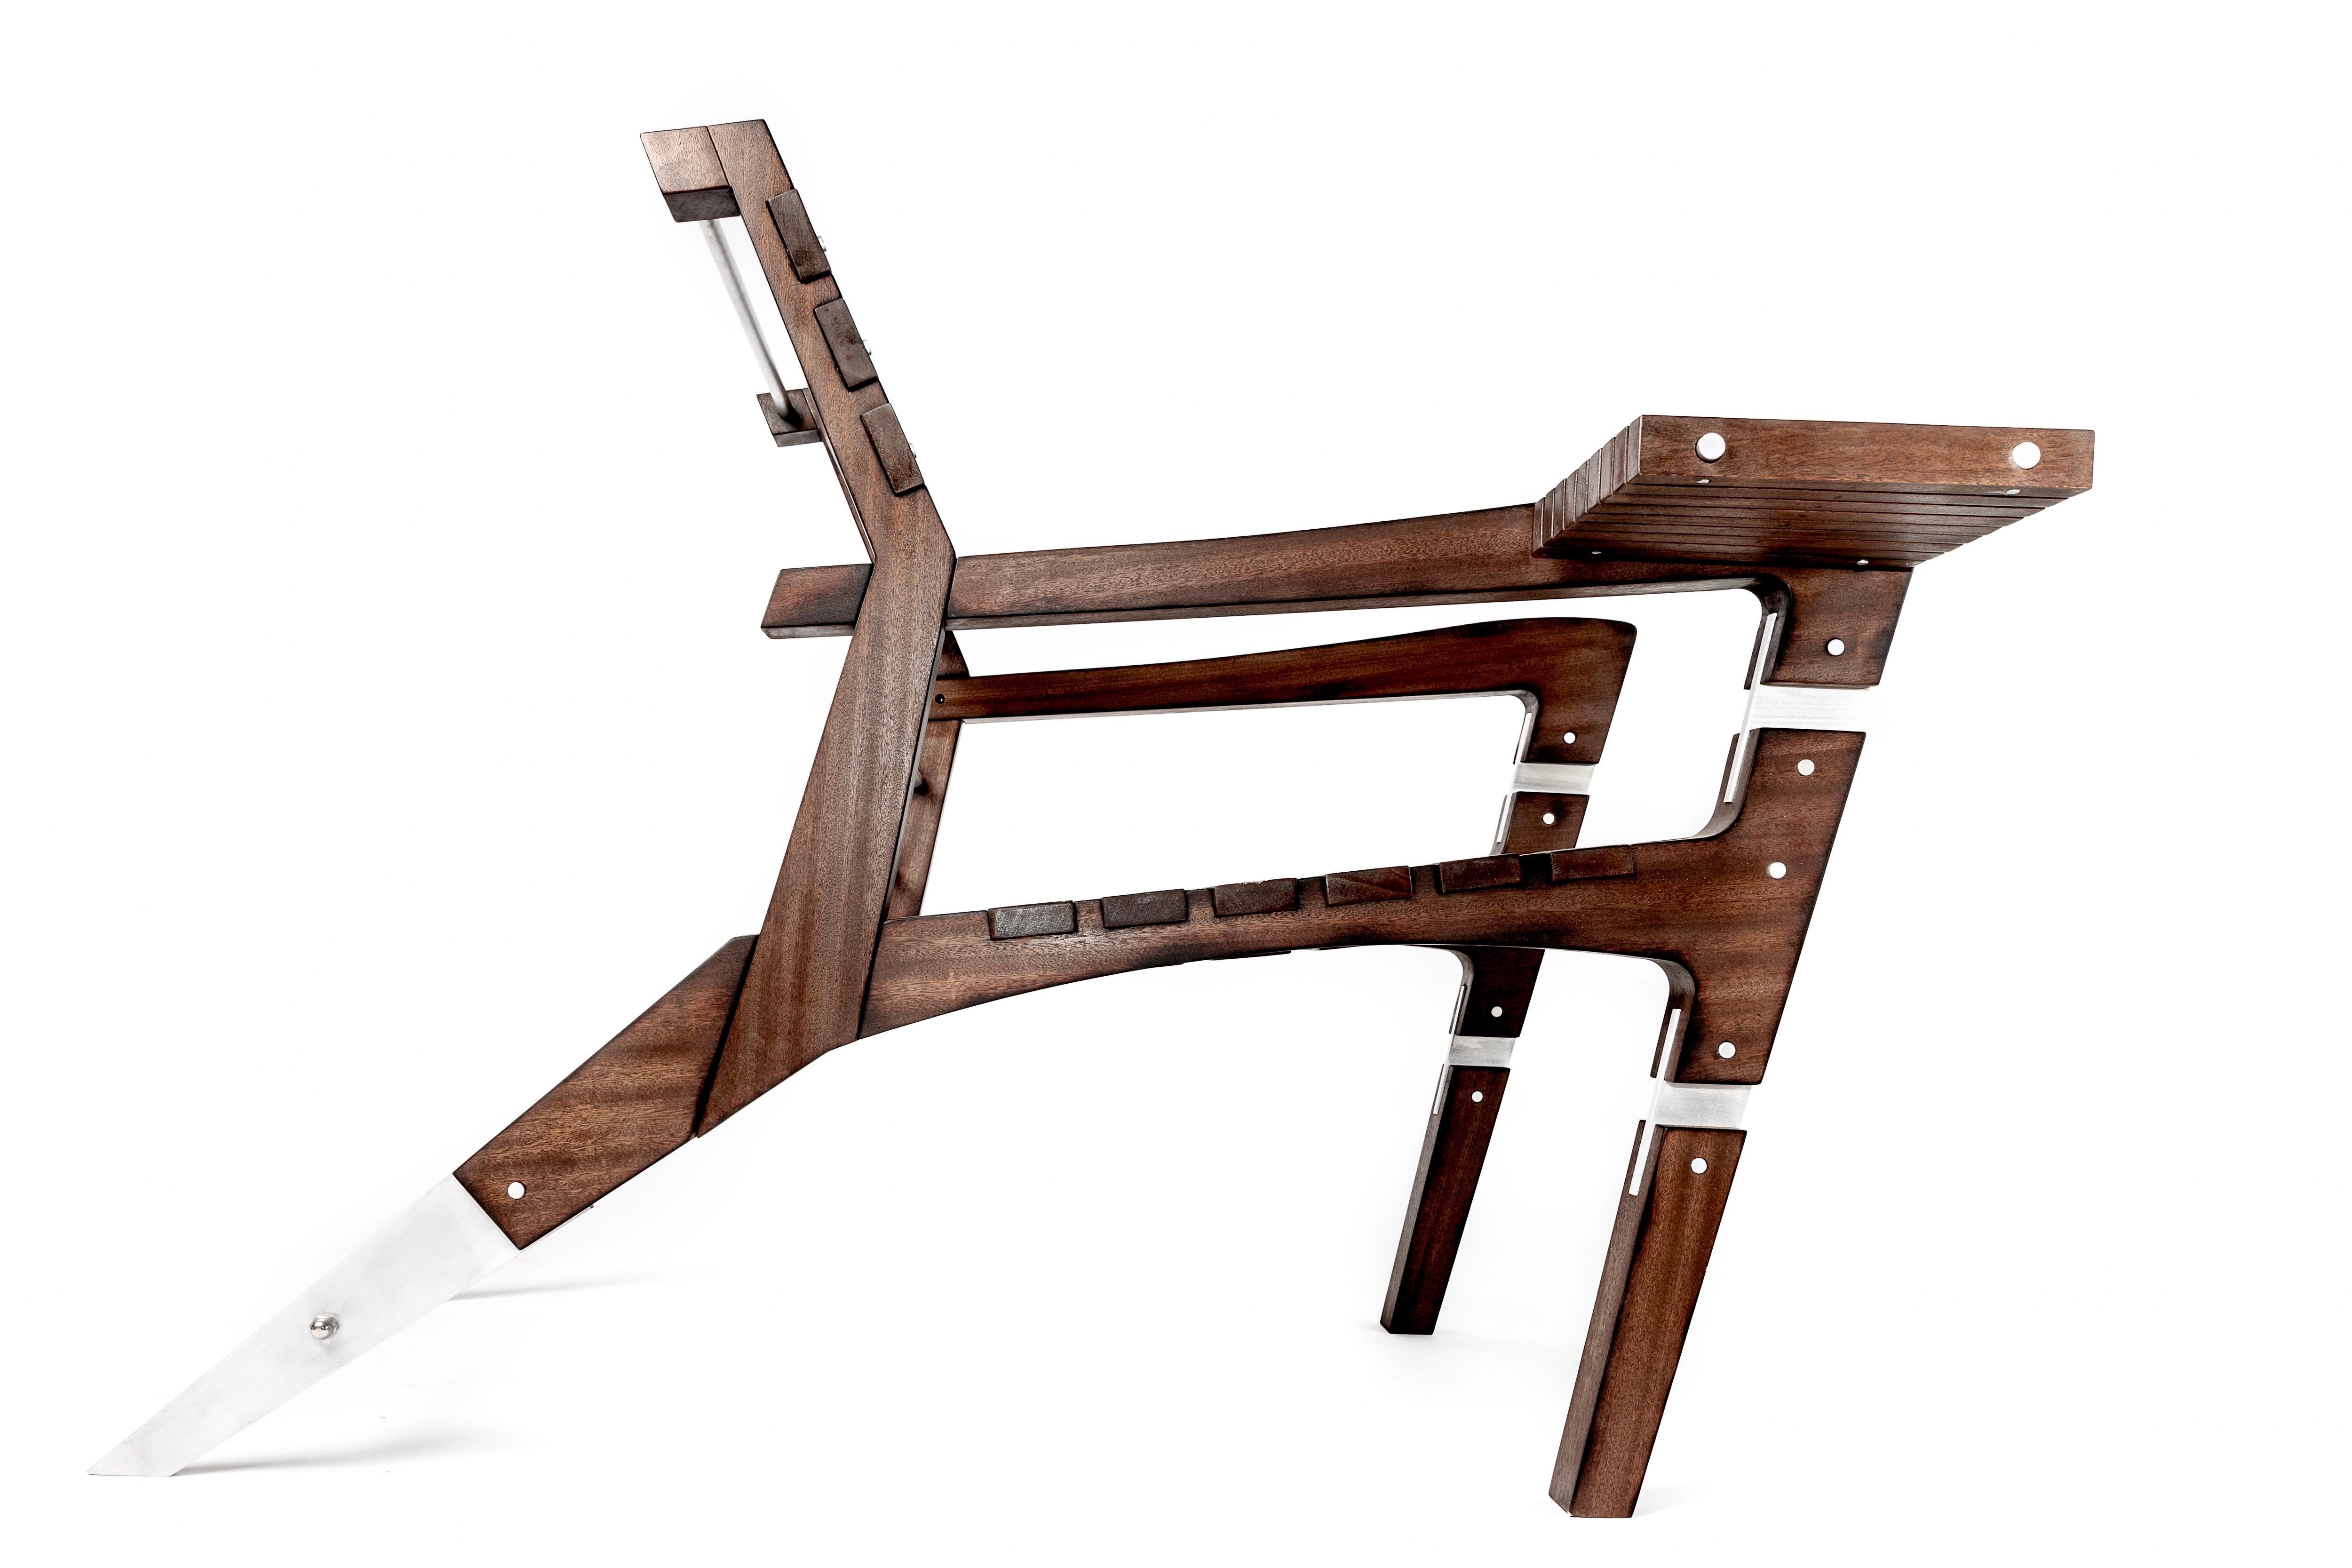 This chair designed and built by Wes Walsworth has a vintage yet futuristic feel. The unique joinery of fine mahogany and aluminum sets this chair apart from the rest. The chair is as comfortable as it is cool. Suited for outdoor use the chair also